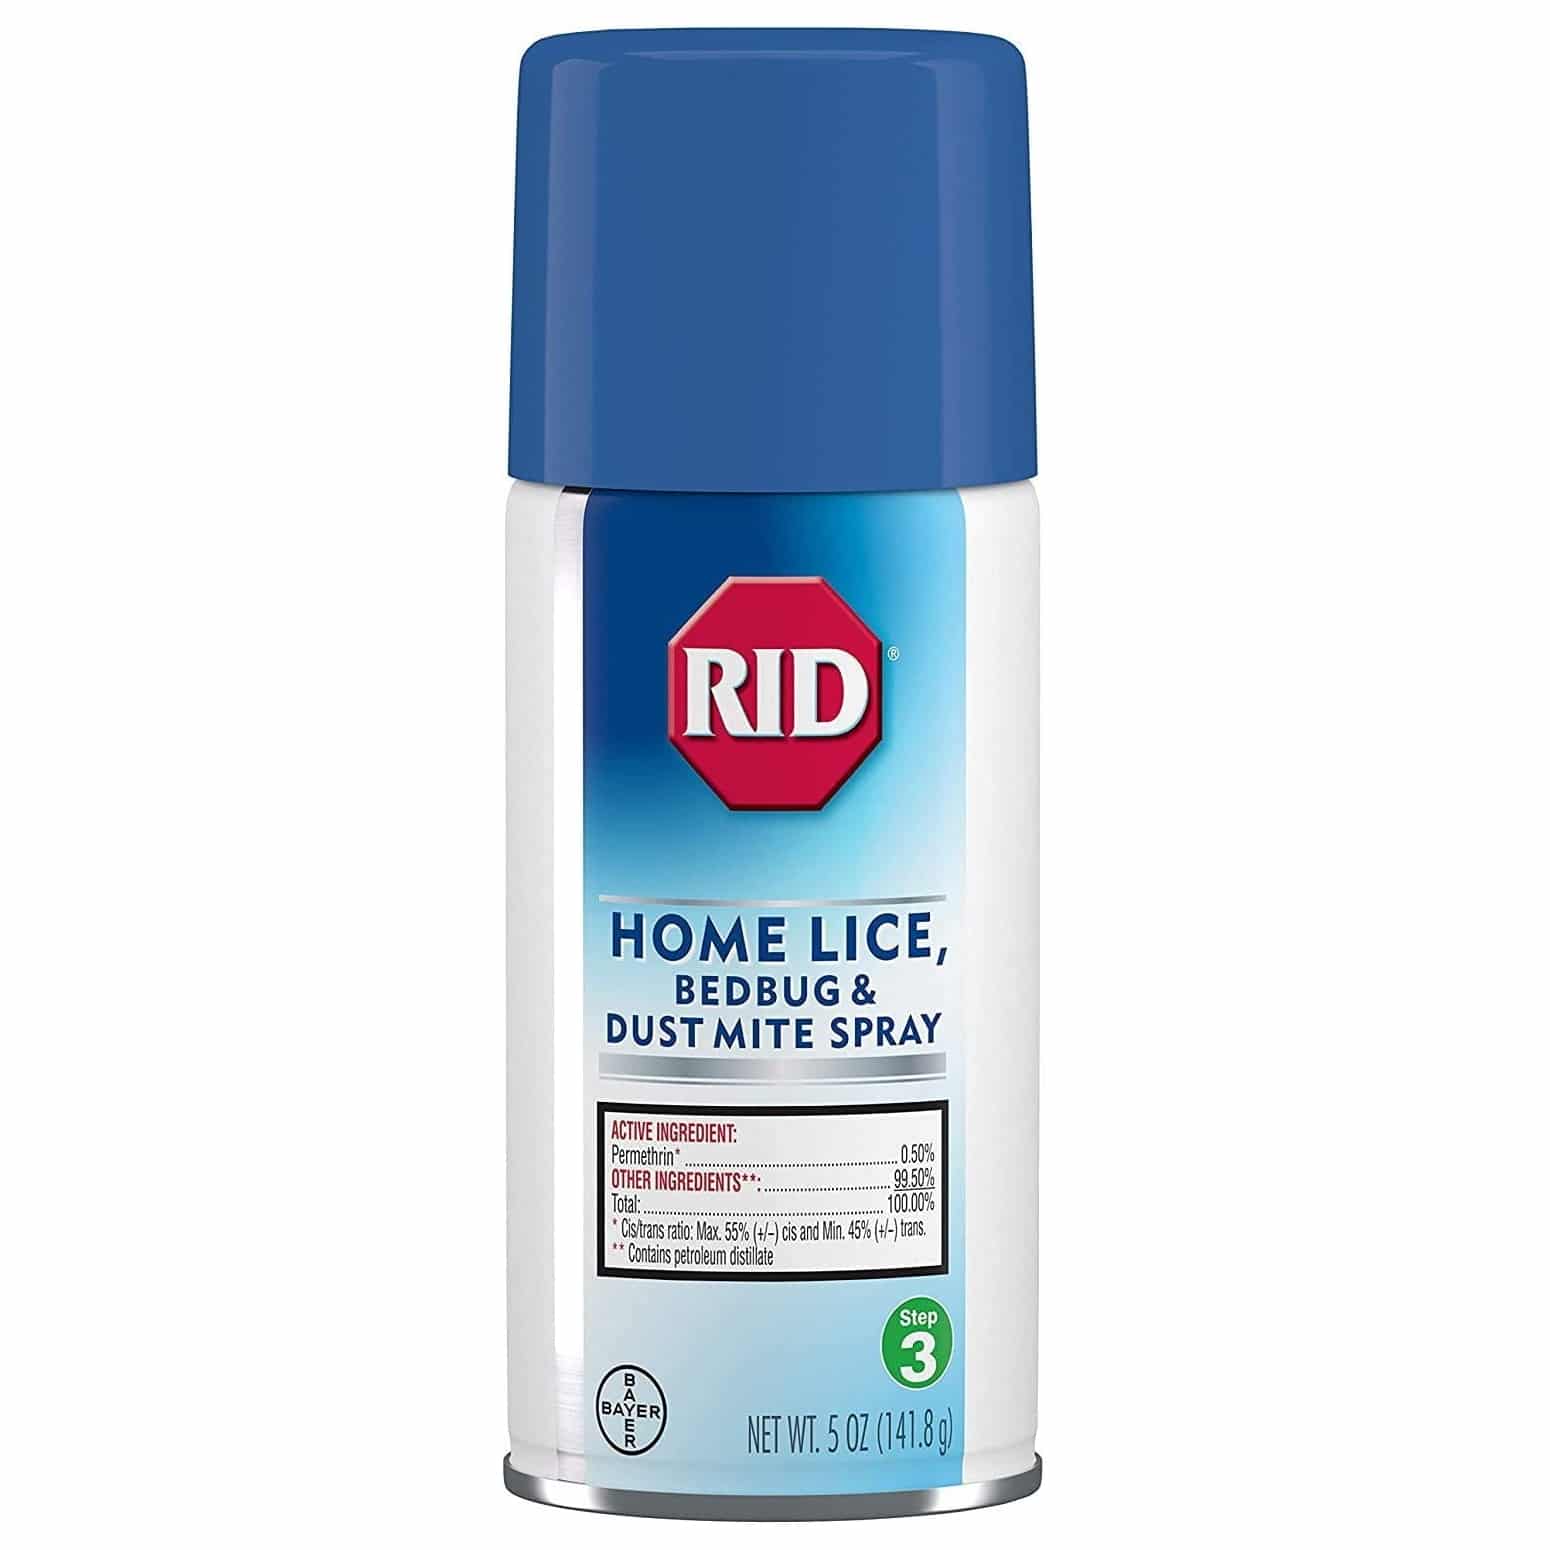 Rid Home Lice, Bedbug and Dust Mite Spray